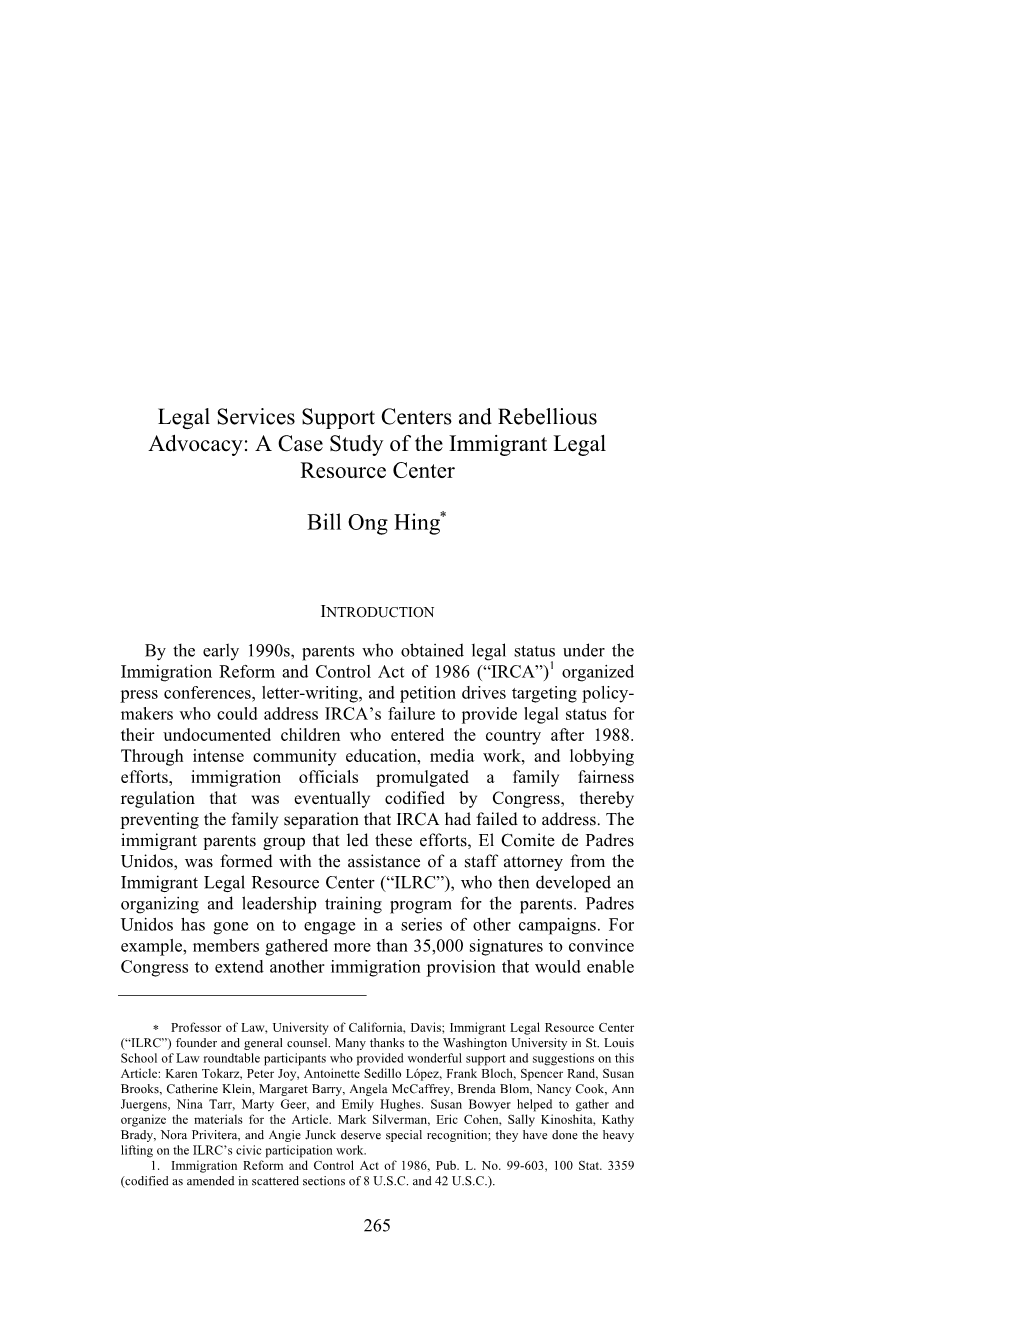 Legal Services Support Centers and Rebellious Advocacy: a Case Study of the Immigrant Legal Resource Center